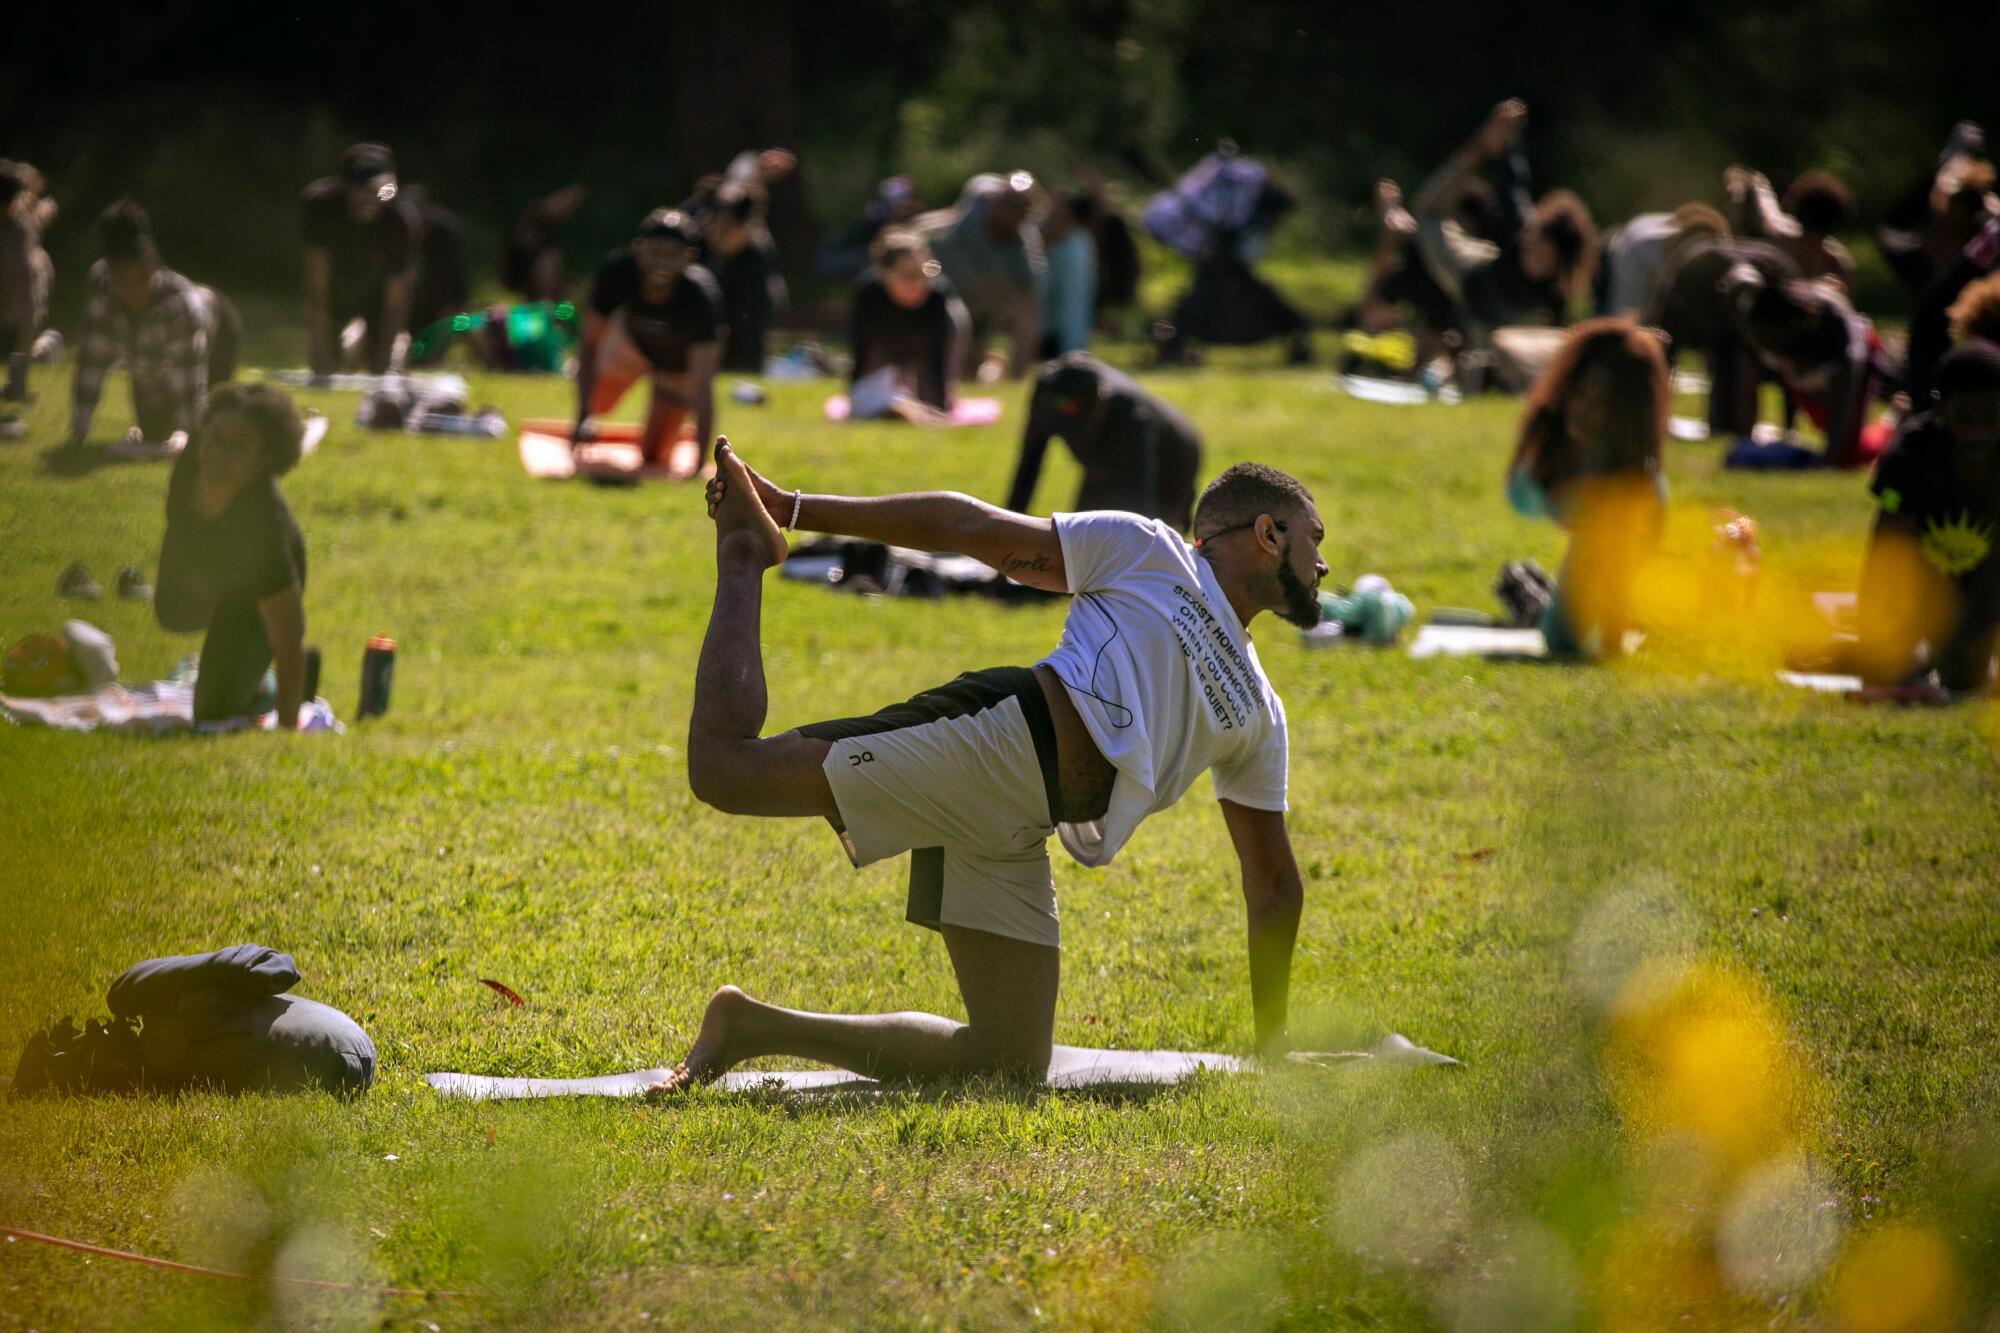 Several people are on one knee while holding up their other leg on mats on a grassy area.